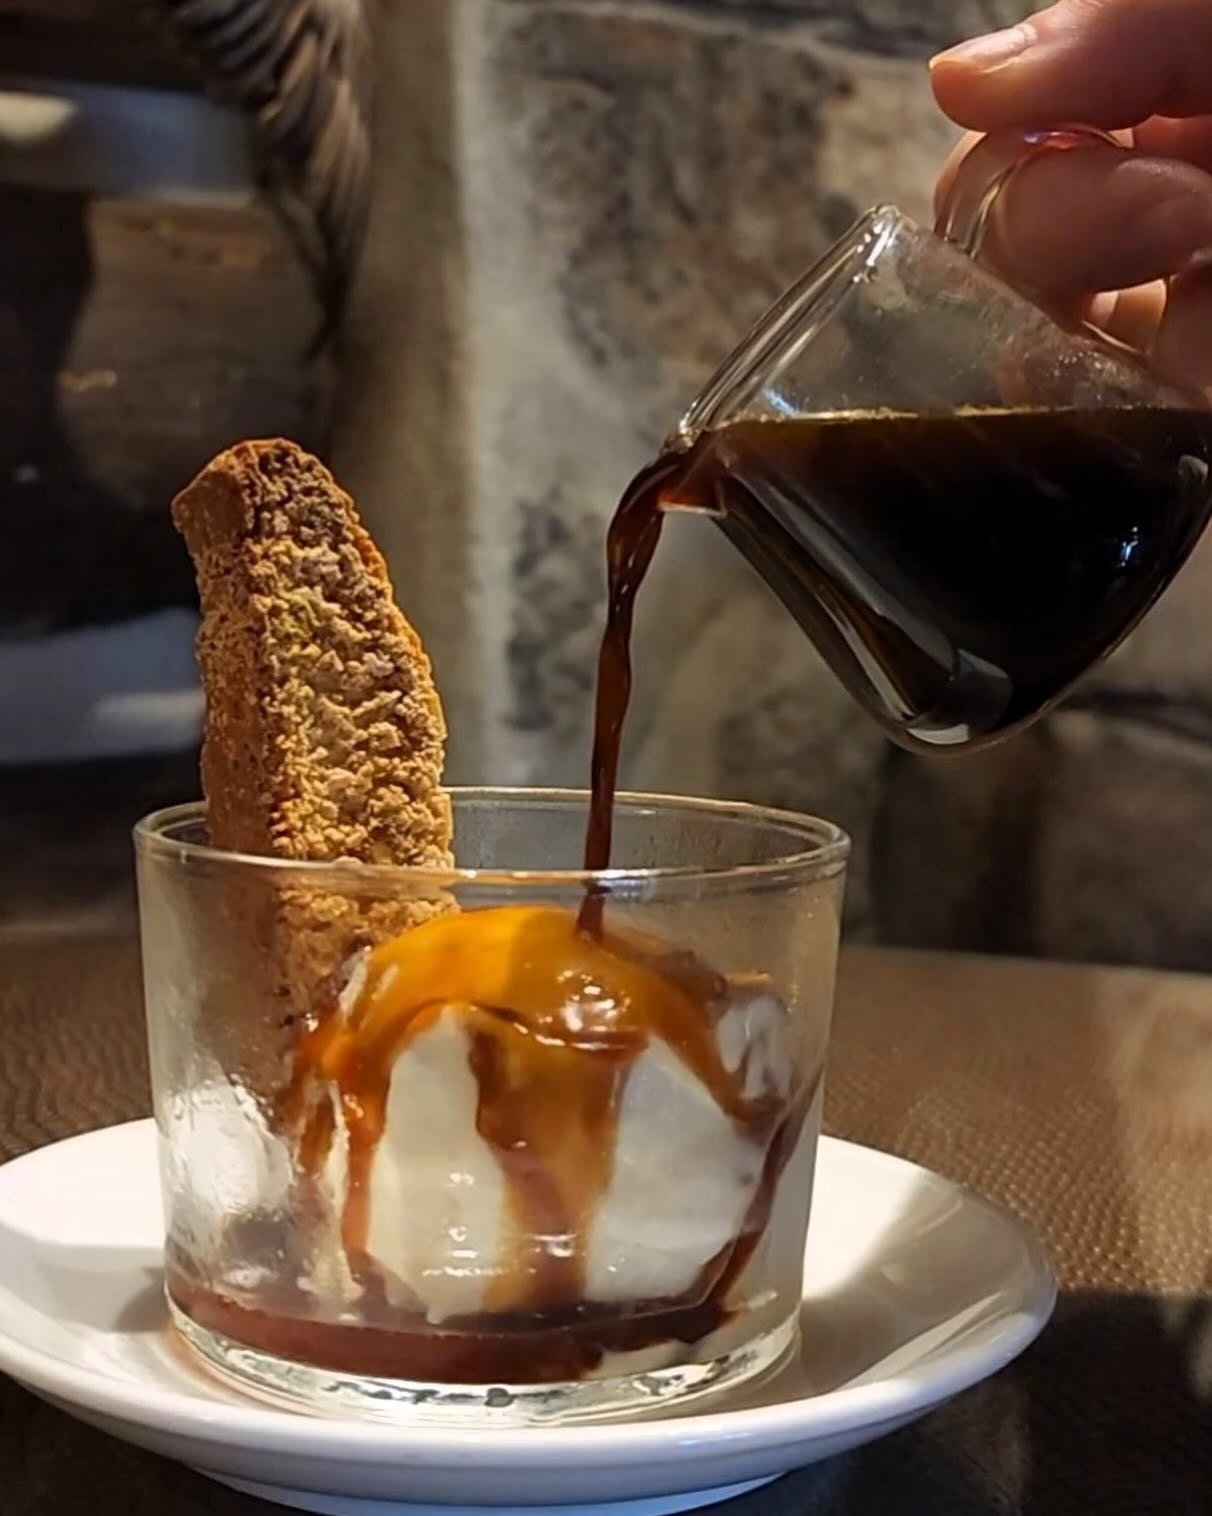 &ldquo;Affogato &lsquo;bout any worries sipping on this delicious boozy combination!&rdquo;. Pop over to the Lodge and taste our Bourbon, Anejo Tequila, and Aged Rum versions! #lodgestyle #affogato #startwithdessert